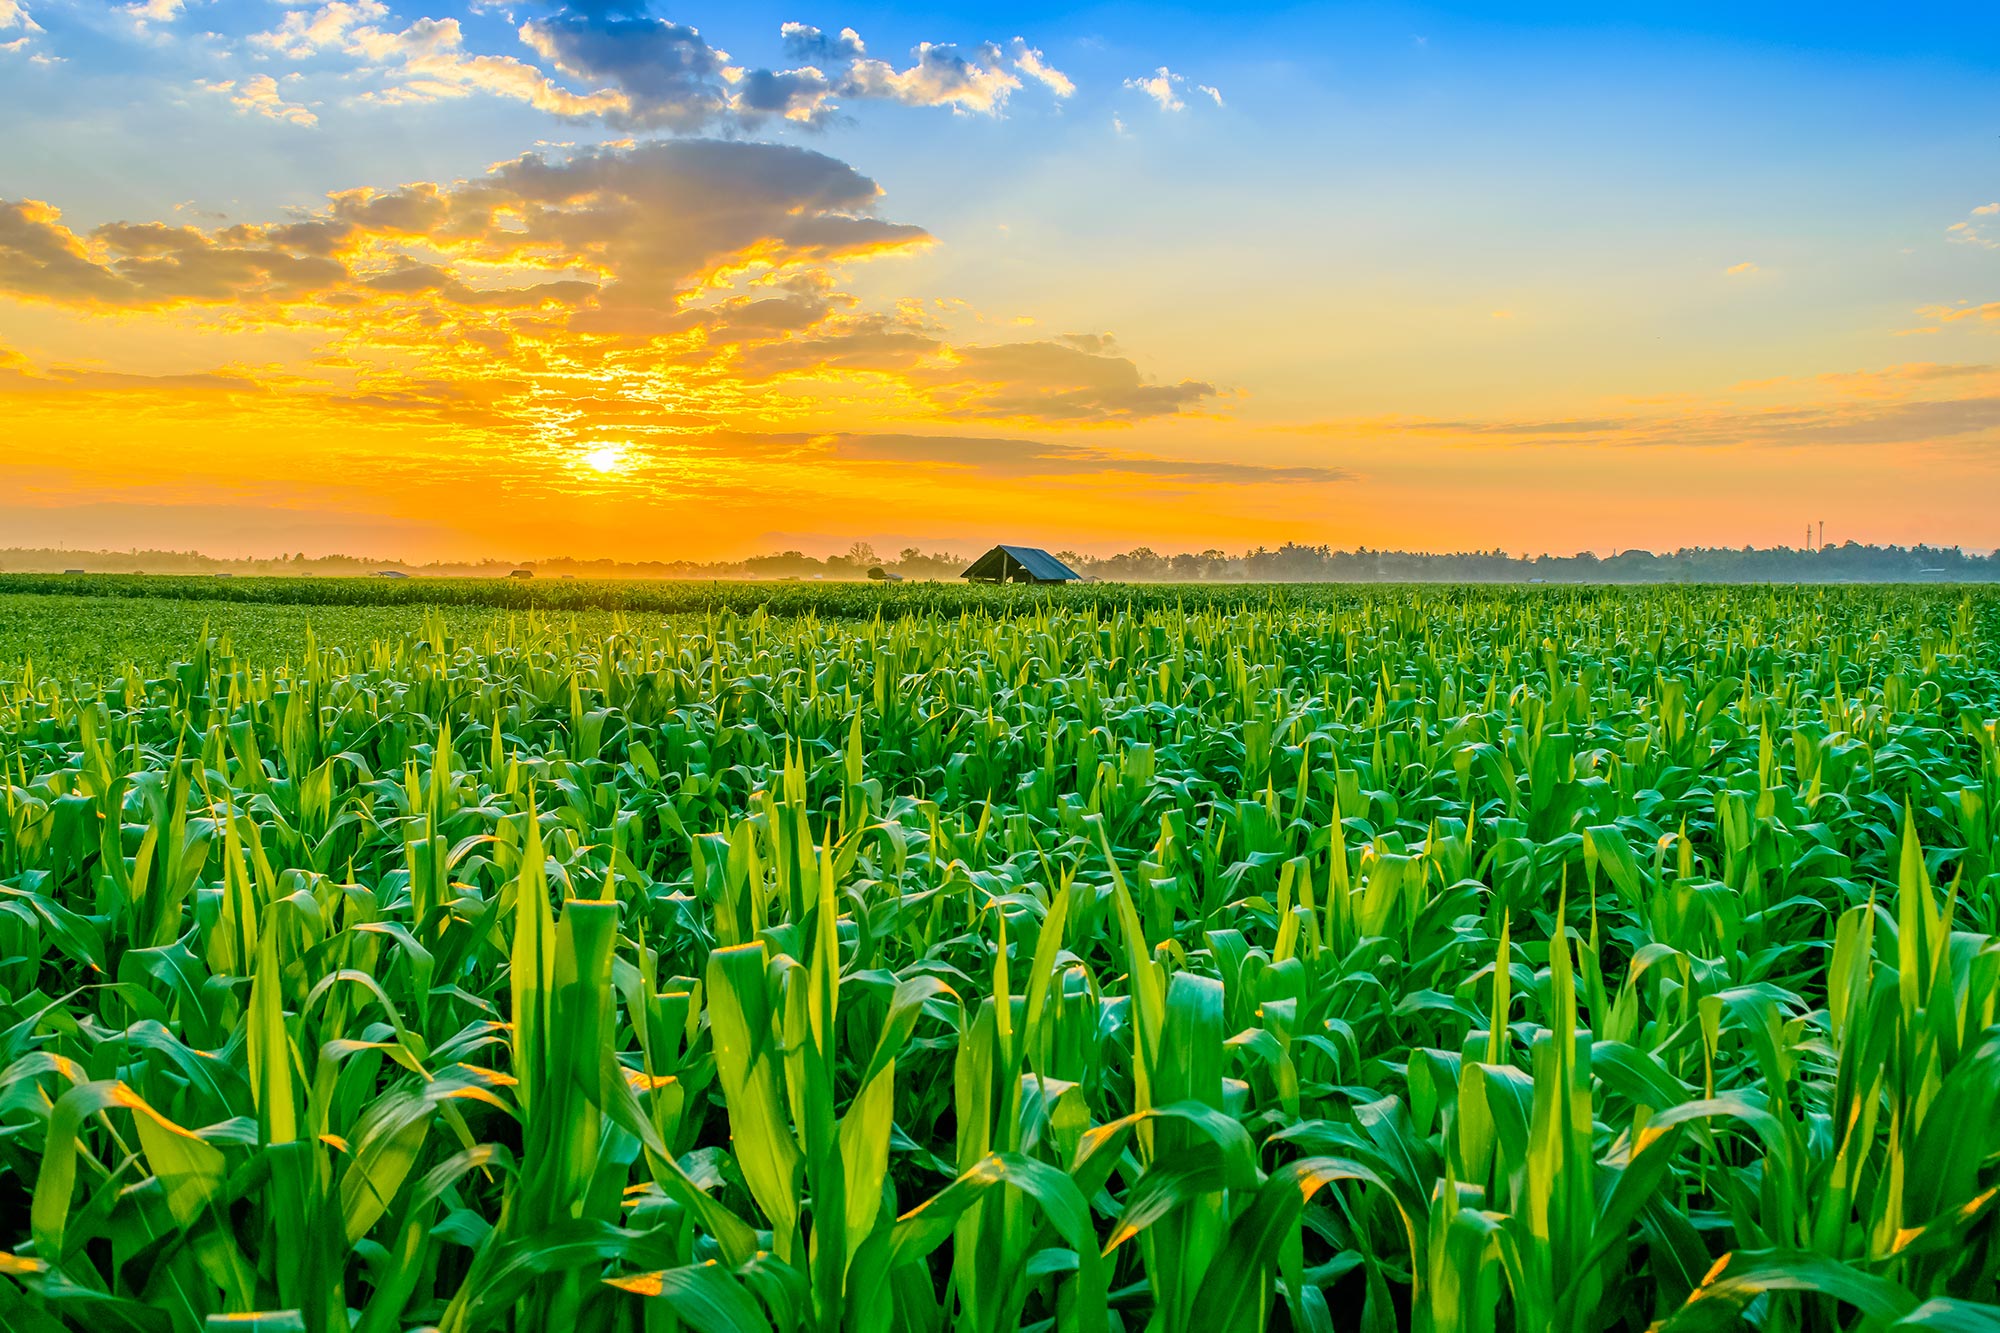 New Real-Time Soil Nitrate Sensor Can Optimize Agricultural Productivity - SciTechDaily